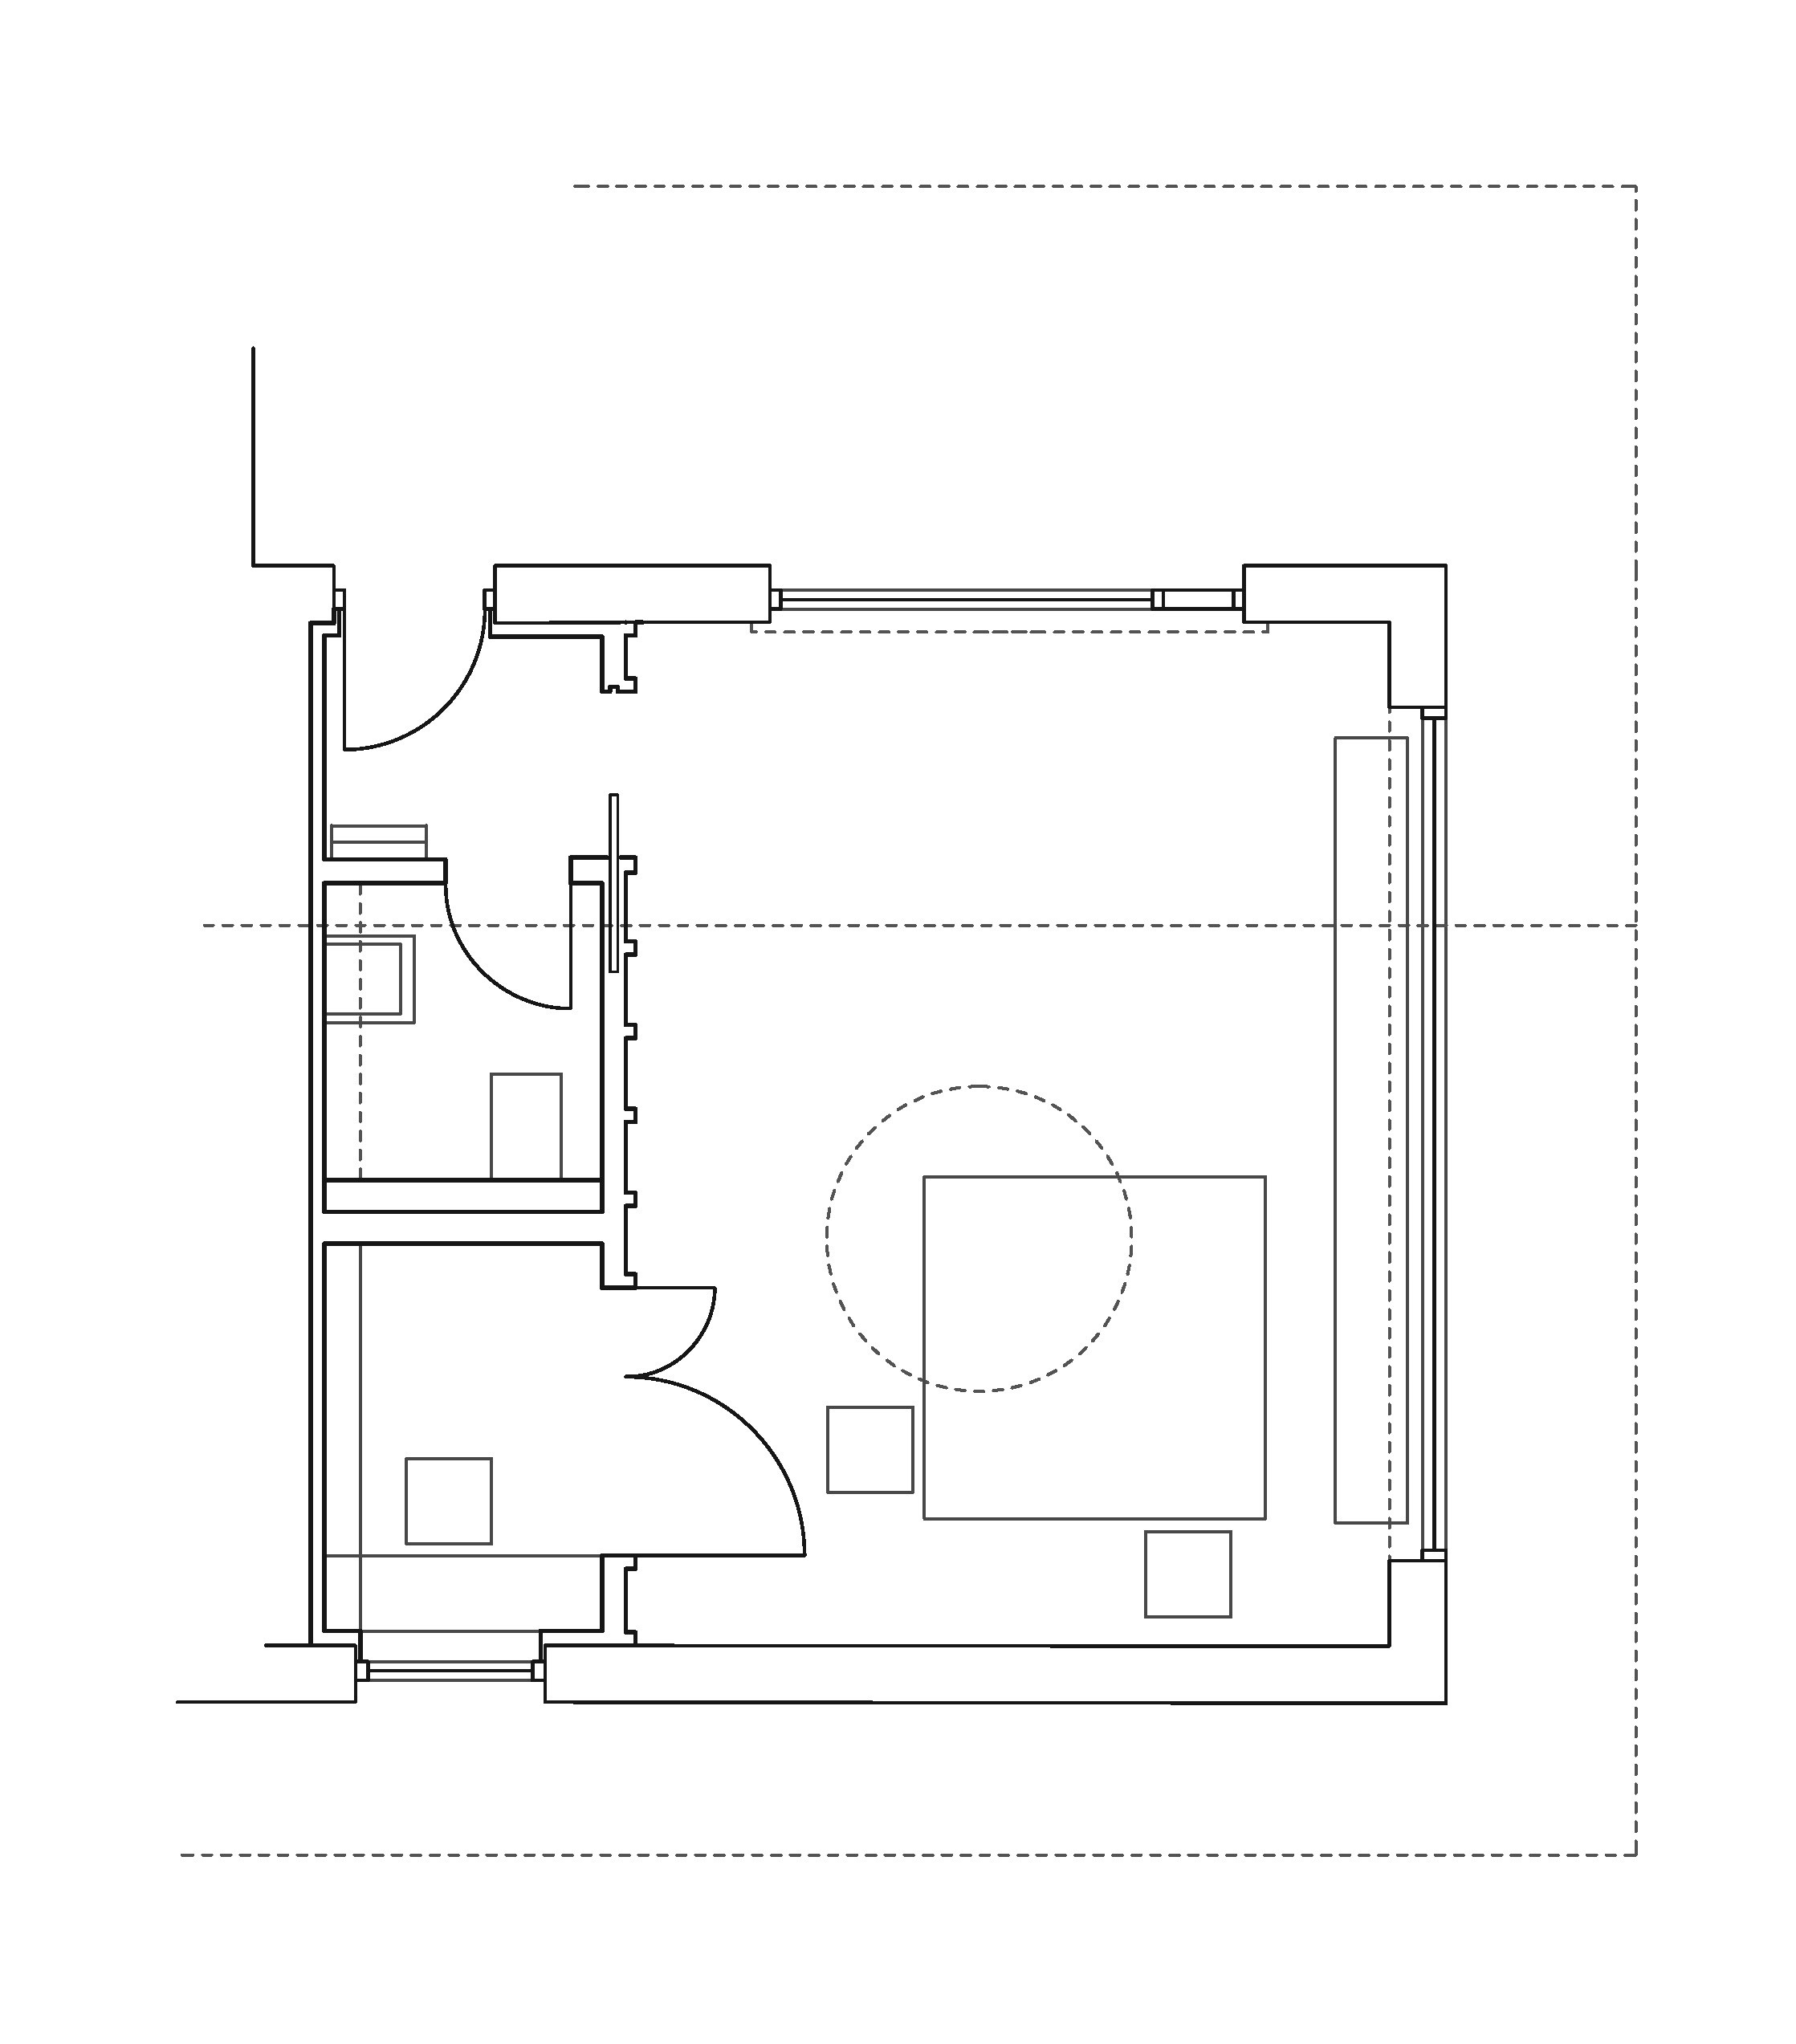 Layout of 40 sqm of workspace